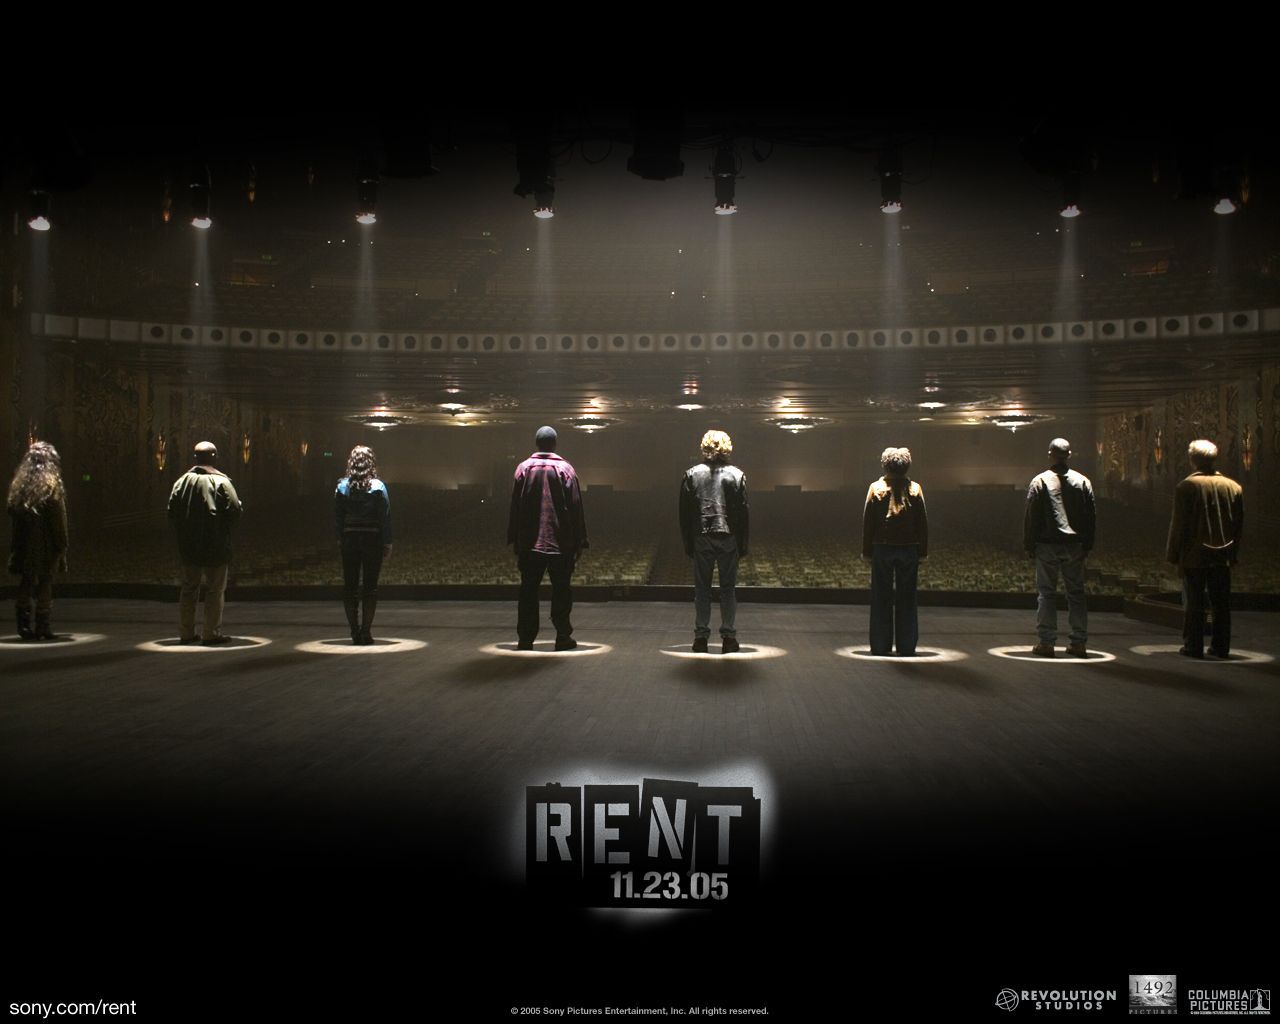 Rent Wallpaper. Rent movies, Rent musical, Musical movies